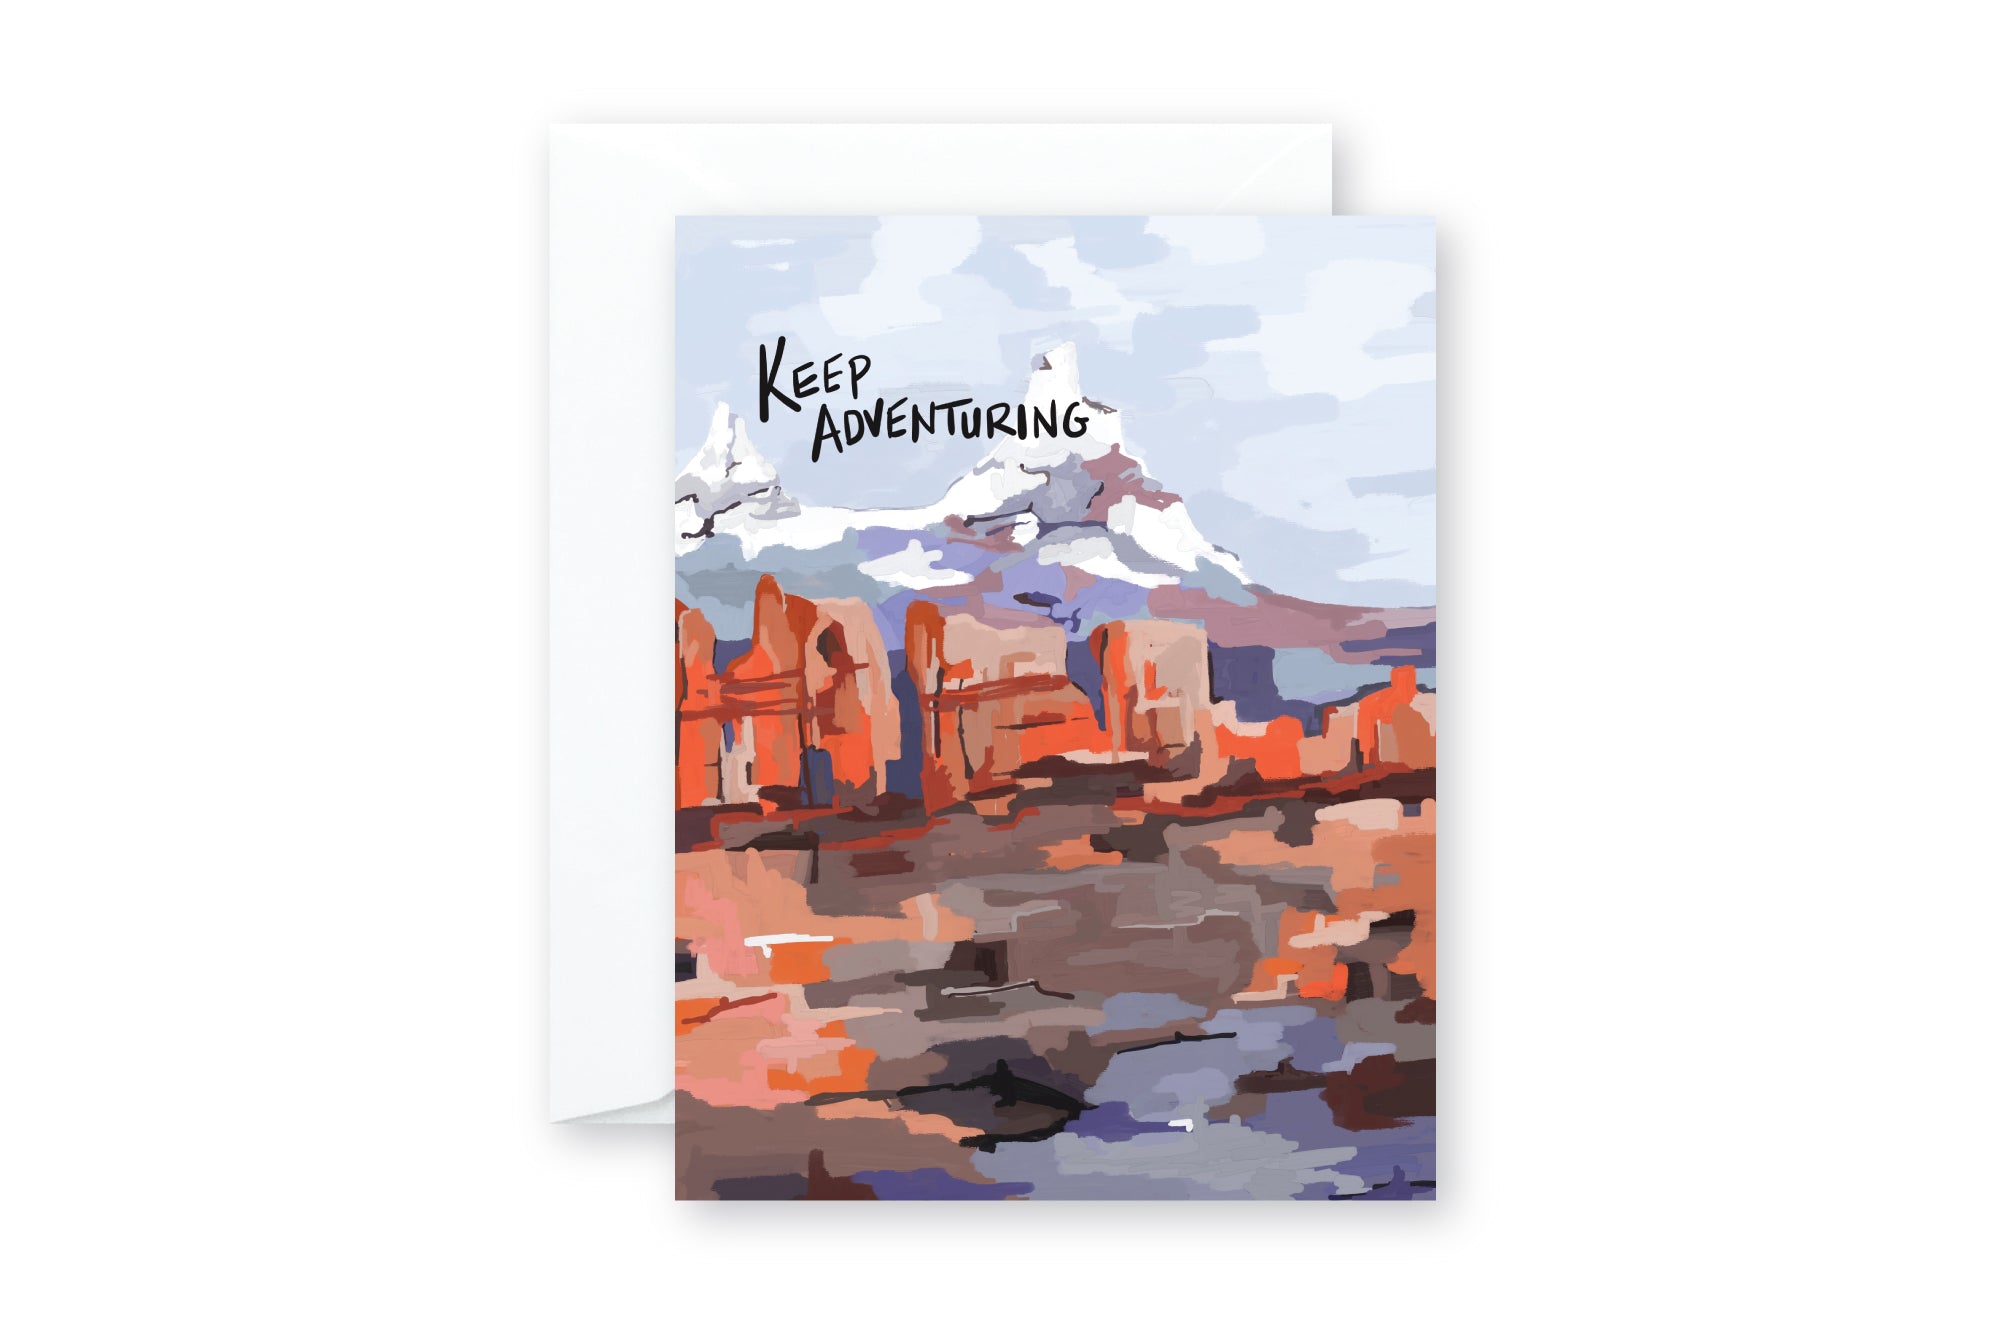 ABSTRACT DESERT LANDSCAPE MOUNTAIN BACKGROUND KEEP ADVENTURING TEXT GREETING CARD